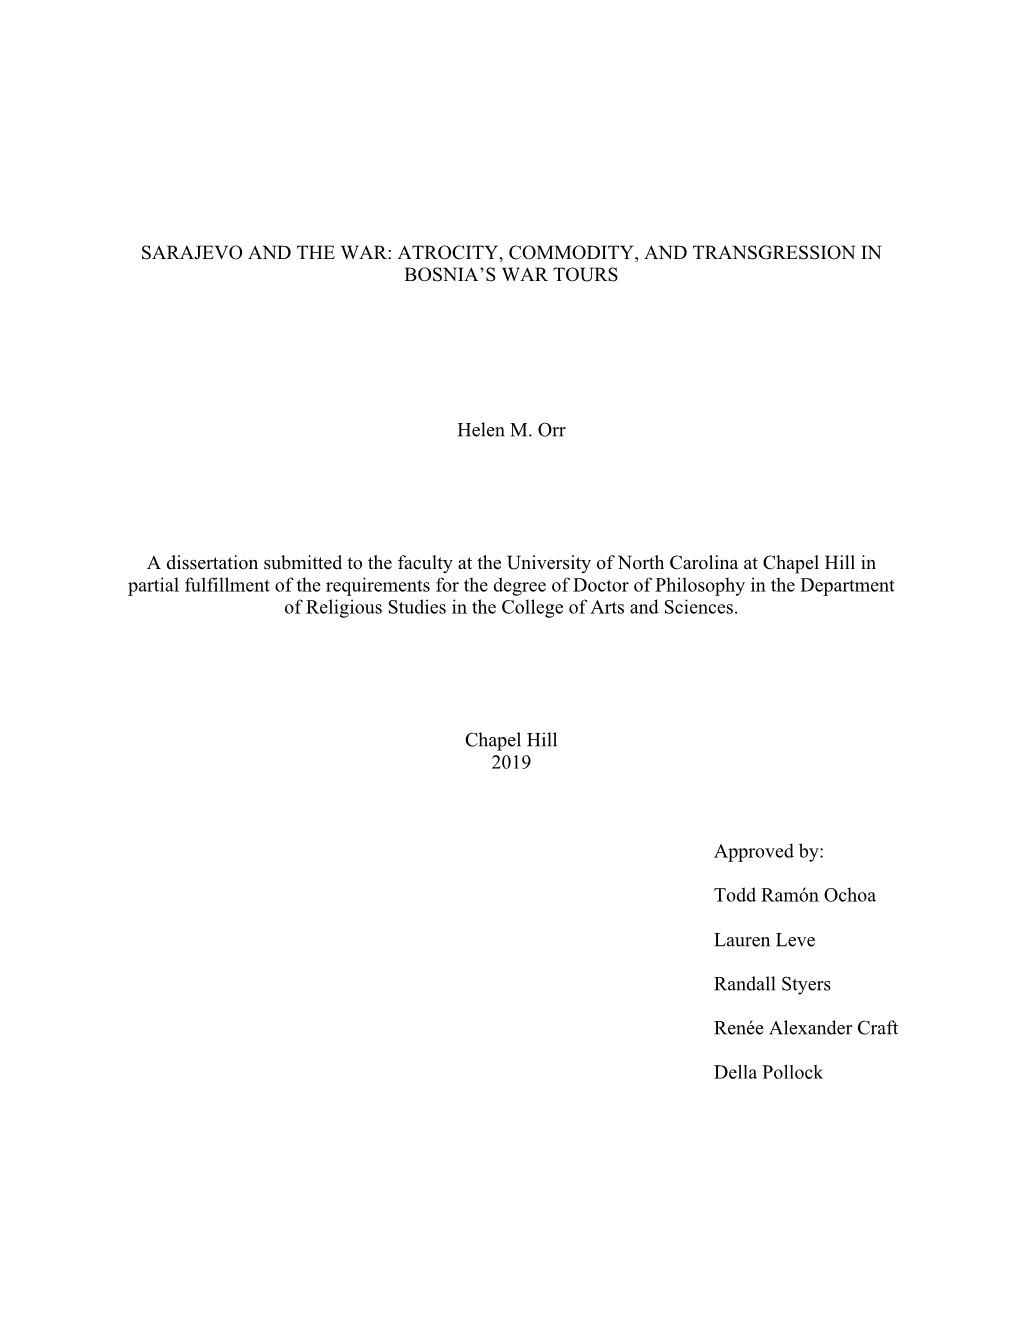 ATROCITY, COMMODITY, and TRANSGRESSION in BOSNIA's WAR TOURS Helen M. Orr a Dissertation Submitted to T